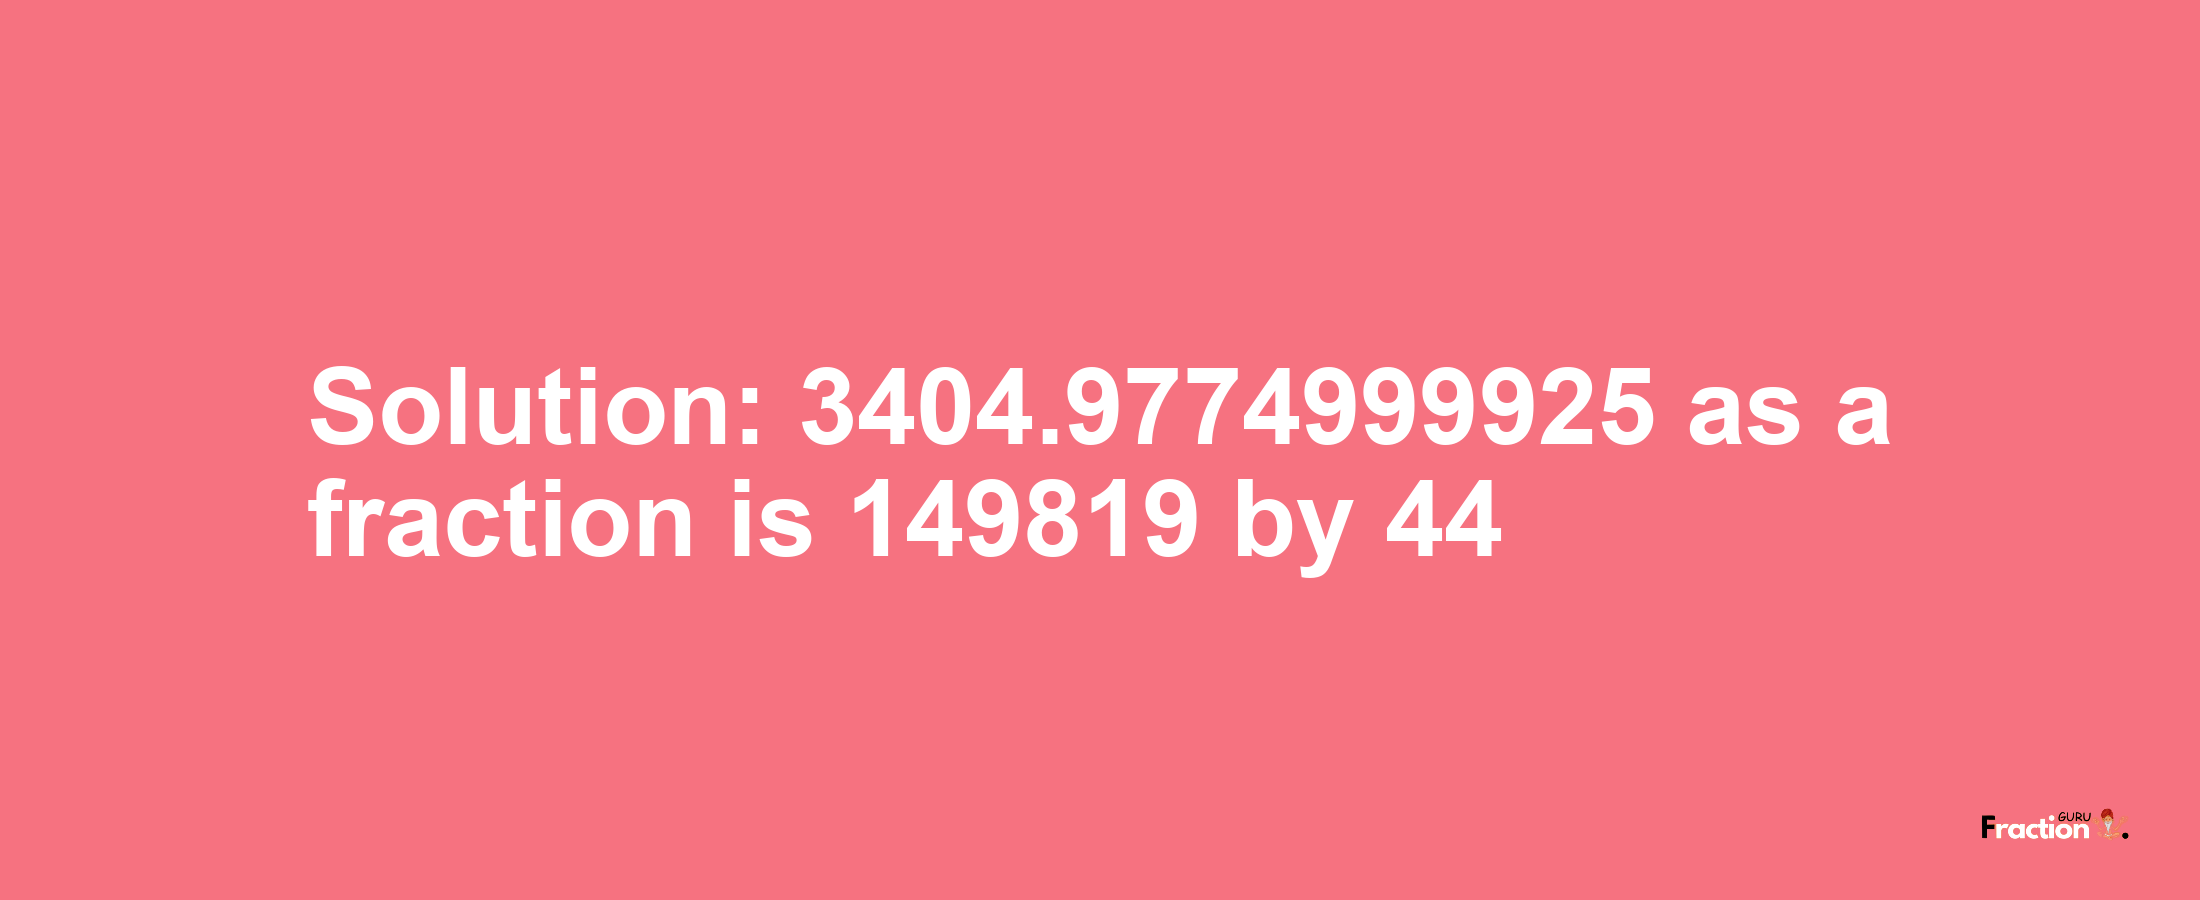 Solution:3404.9774999925 as a fraction is 149819/44